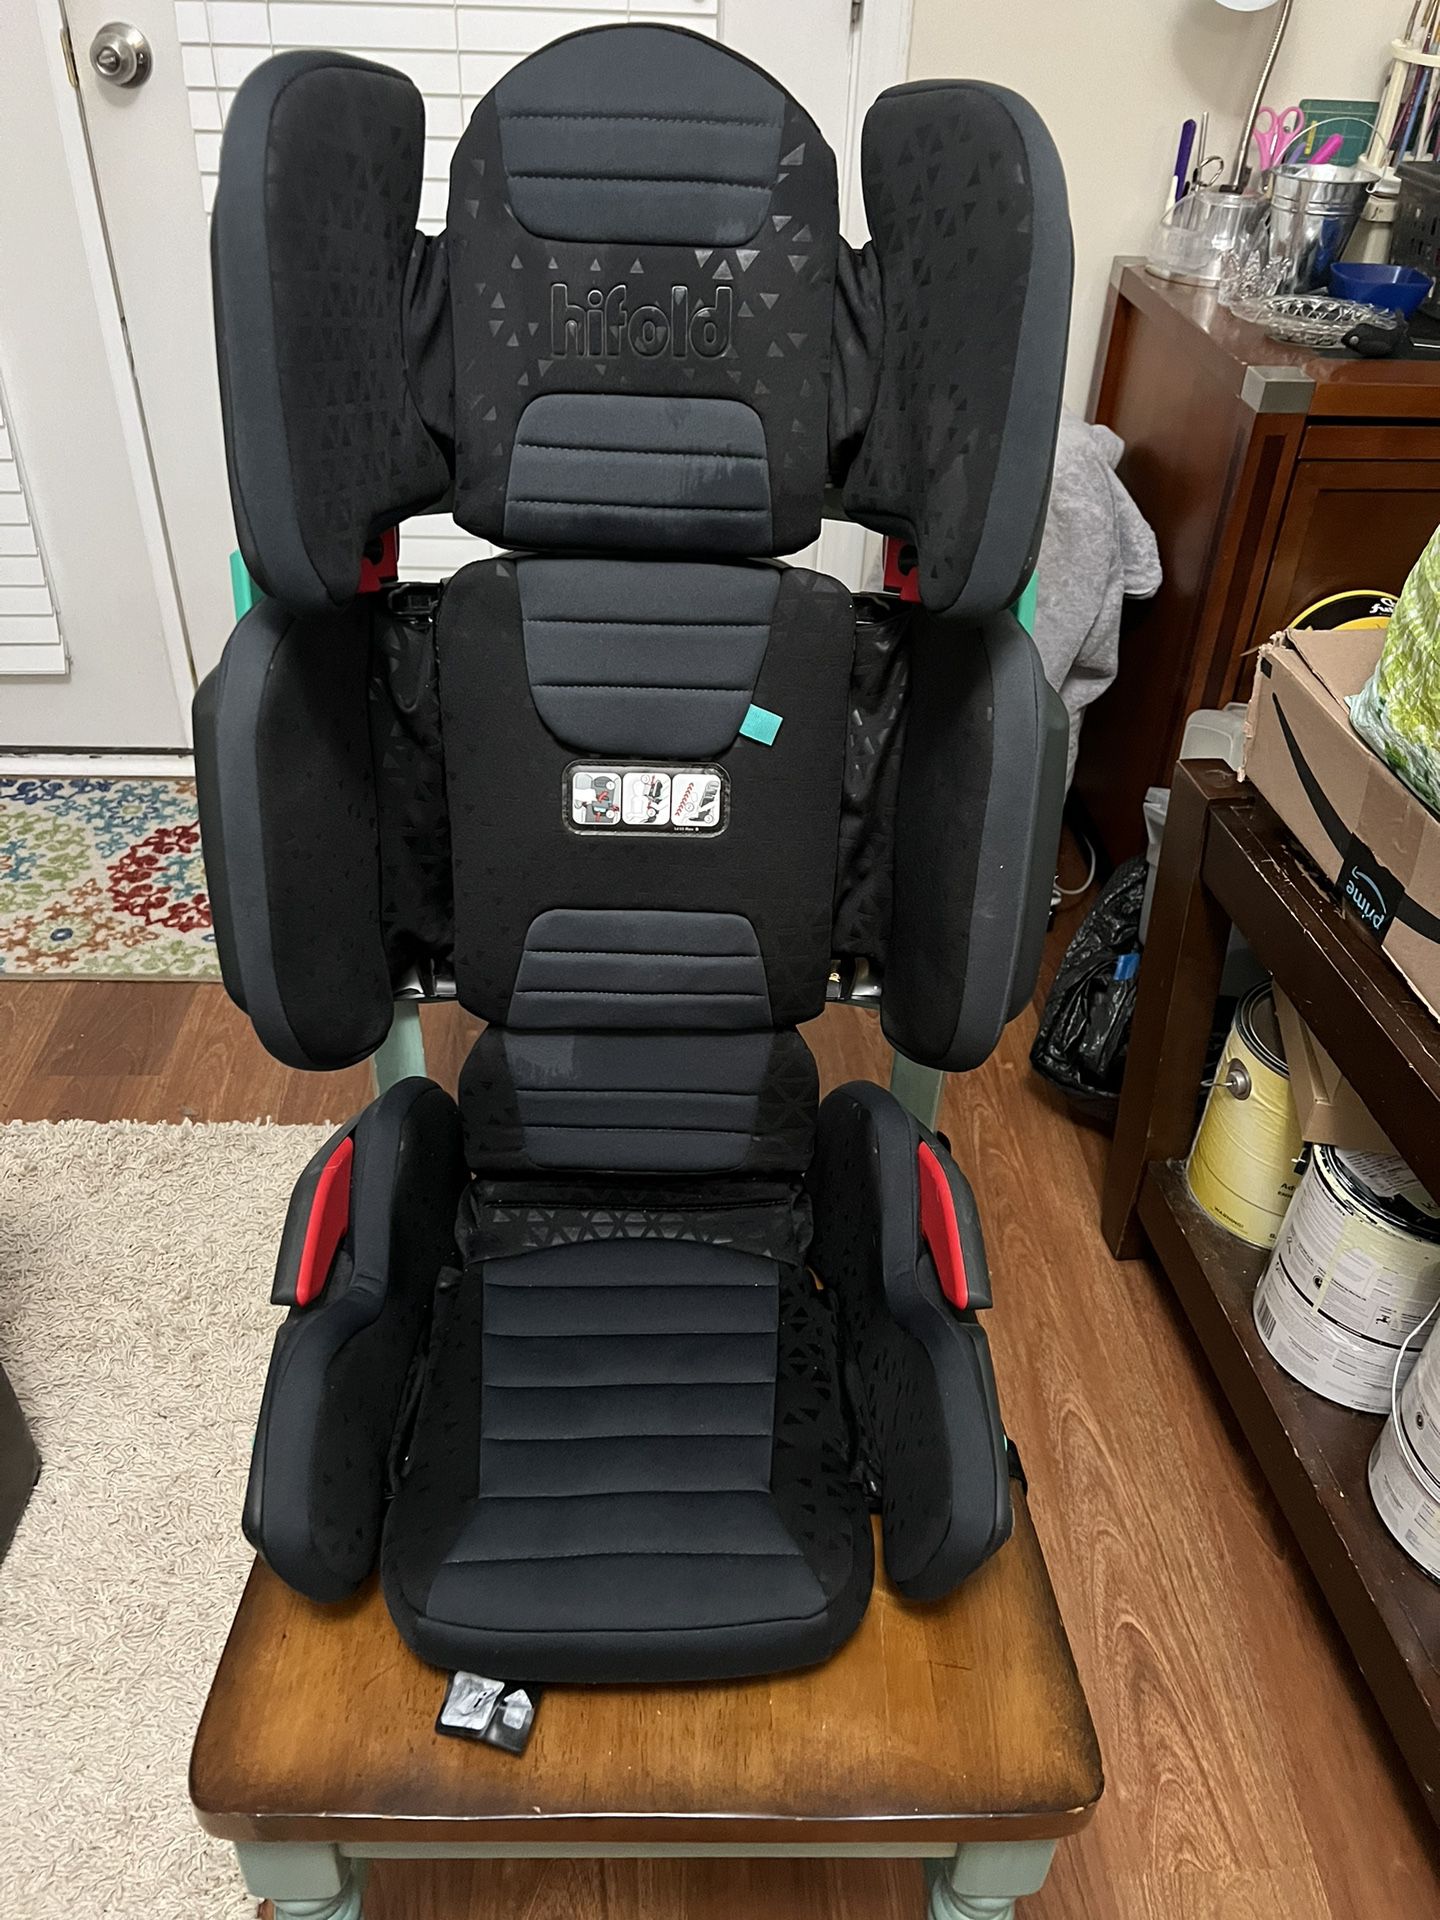 mifold hifold Portable Booster Seat ~ $80 OBO